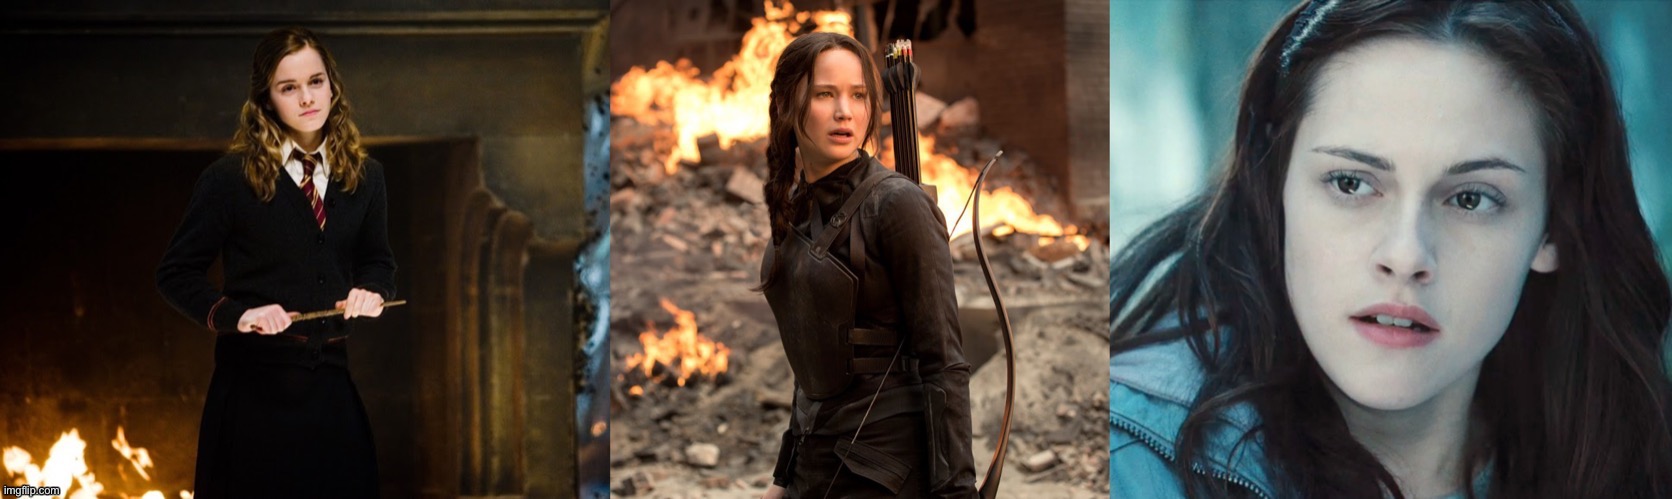 These are the most badass women ever | image tagged in katniss everdeen,hermione granger,bella,hunger games,harry potter,twilight | made w/ Imgflip meme maker